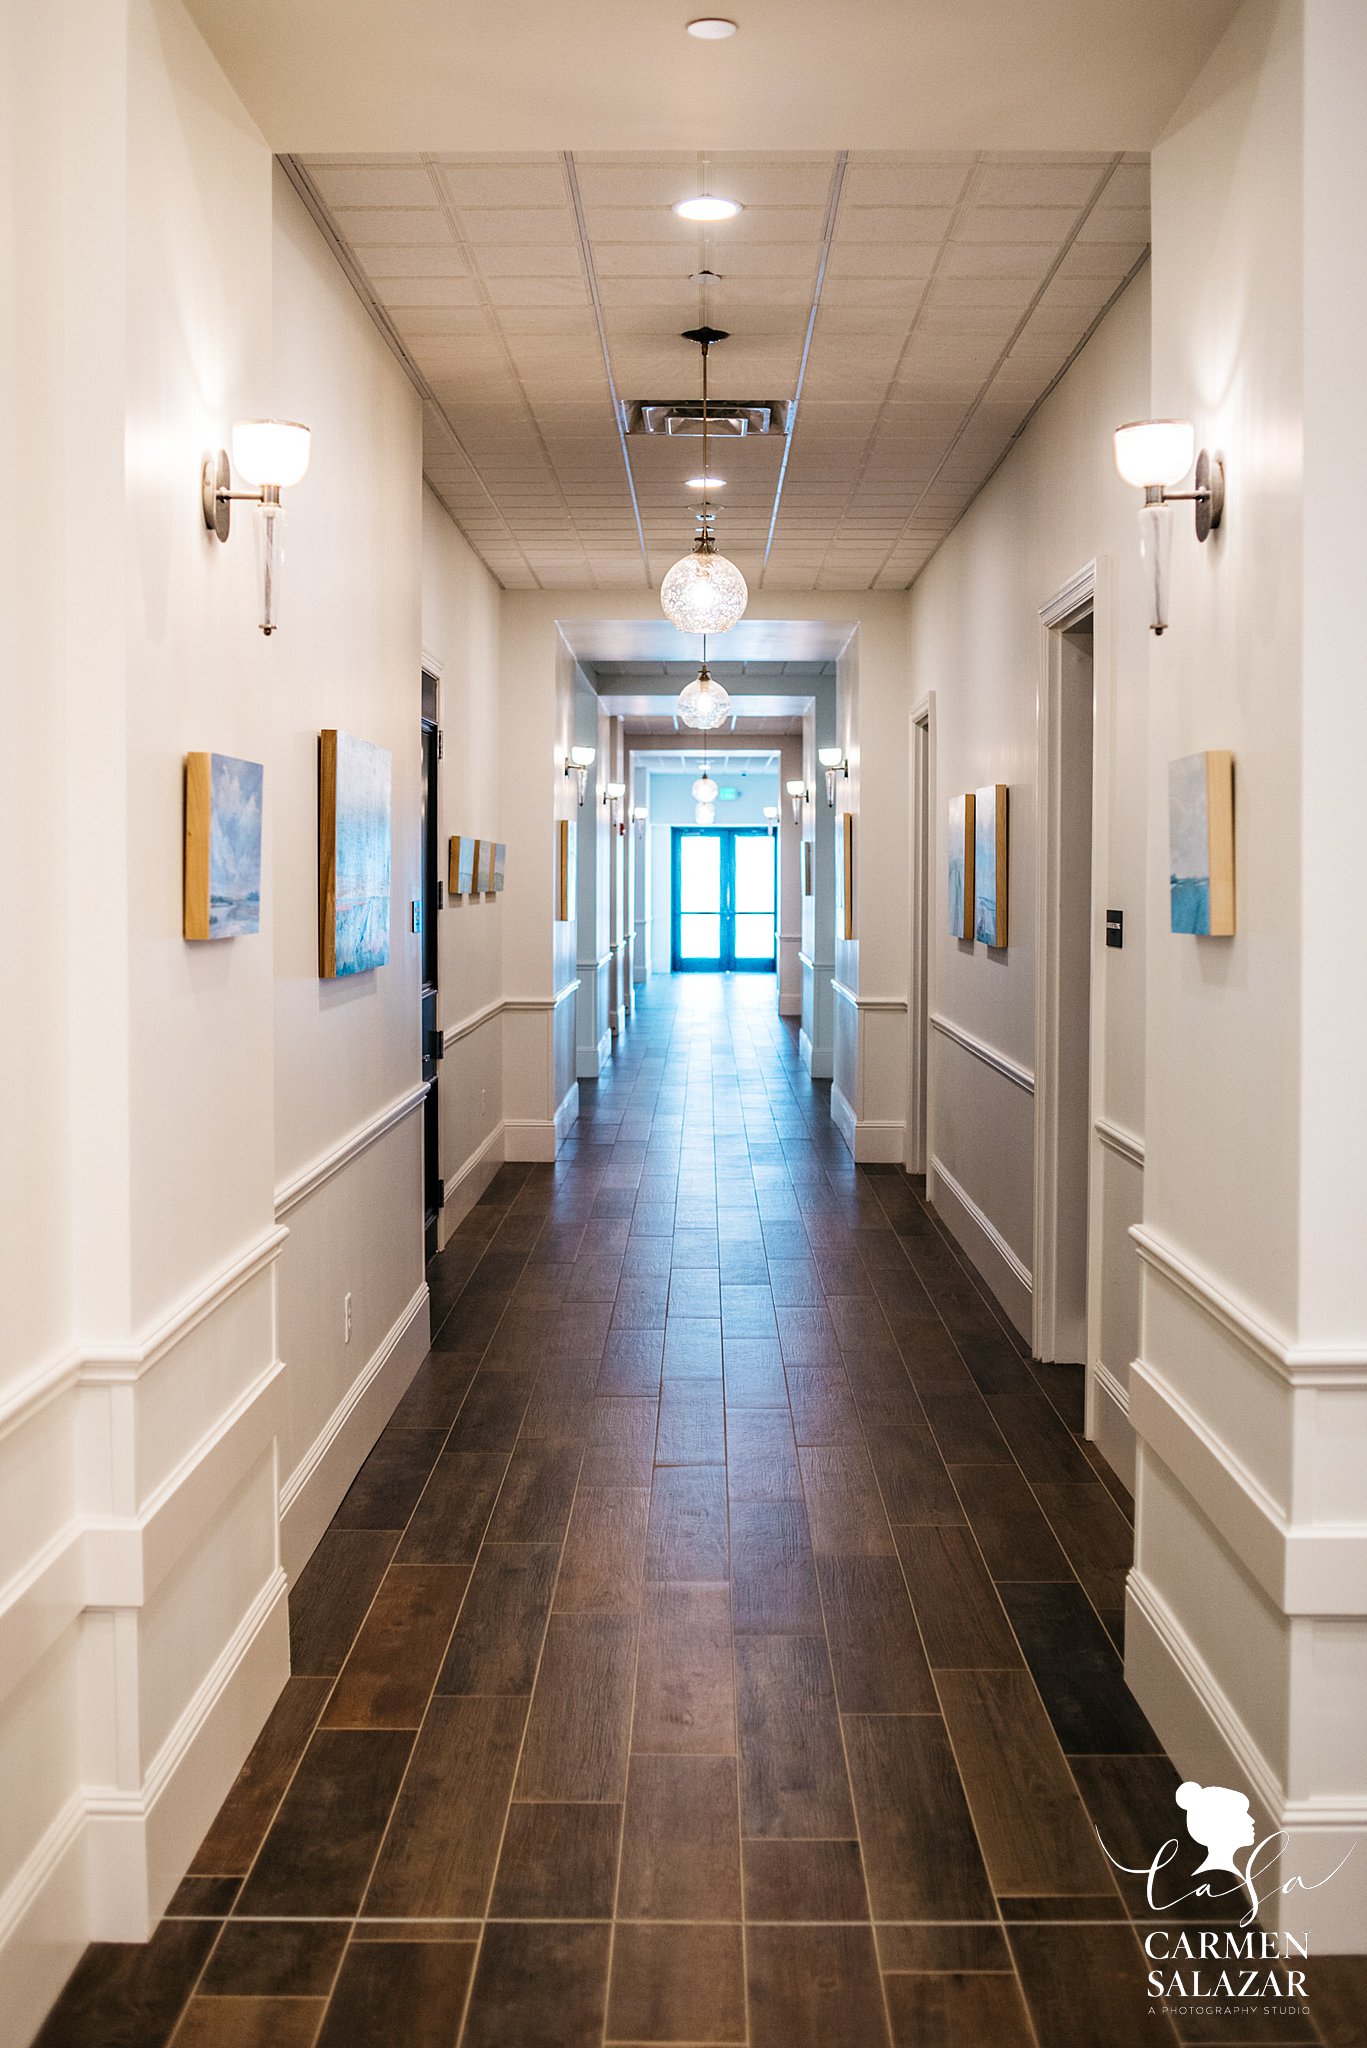 Hotels corridor with natural light 